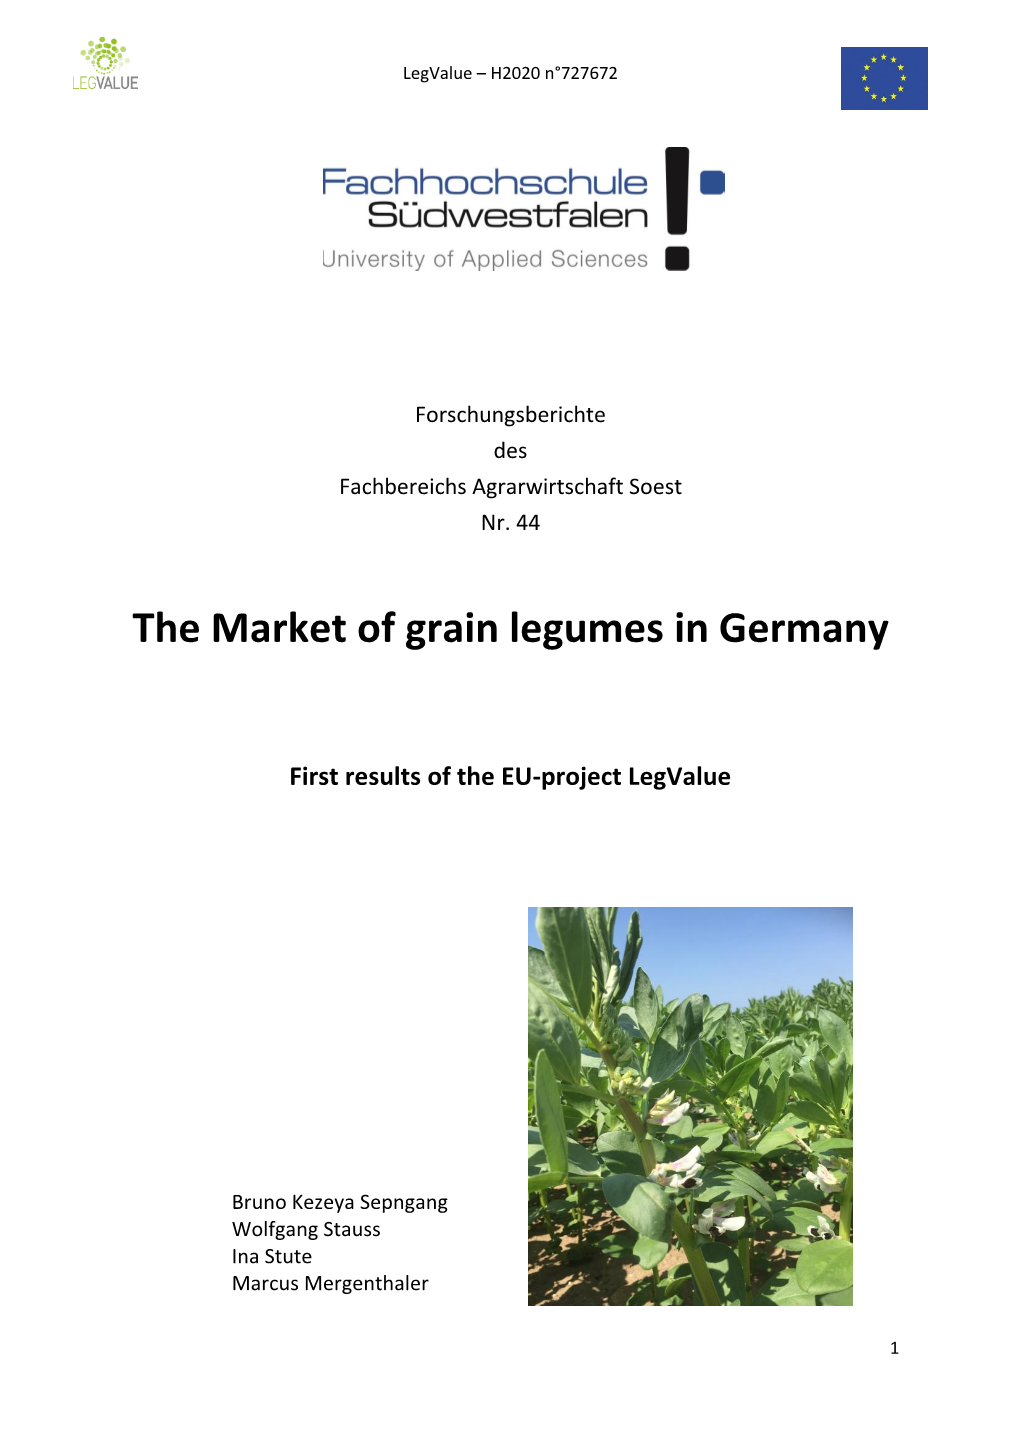 The Market of Grain Legumes in Germany